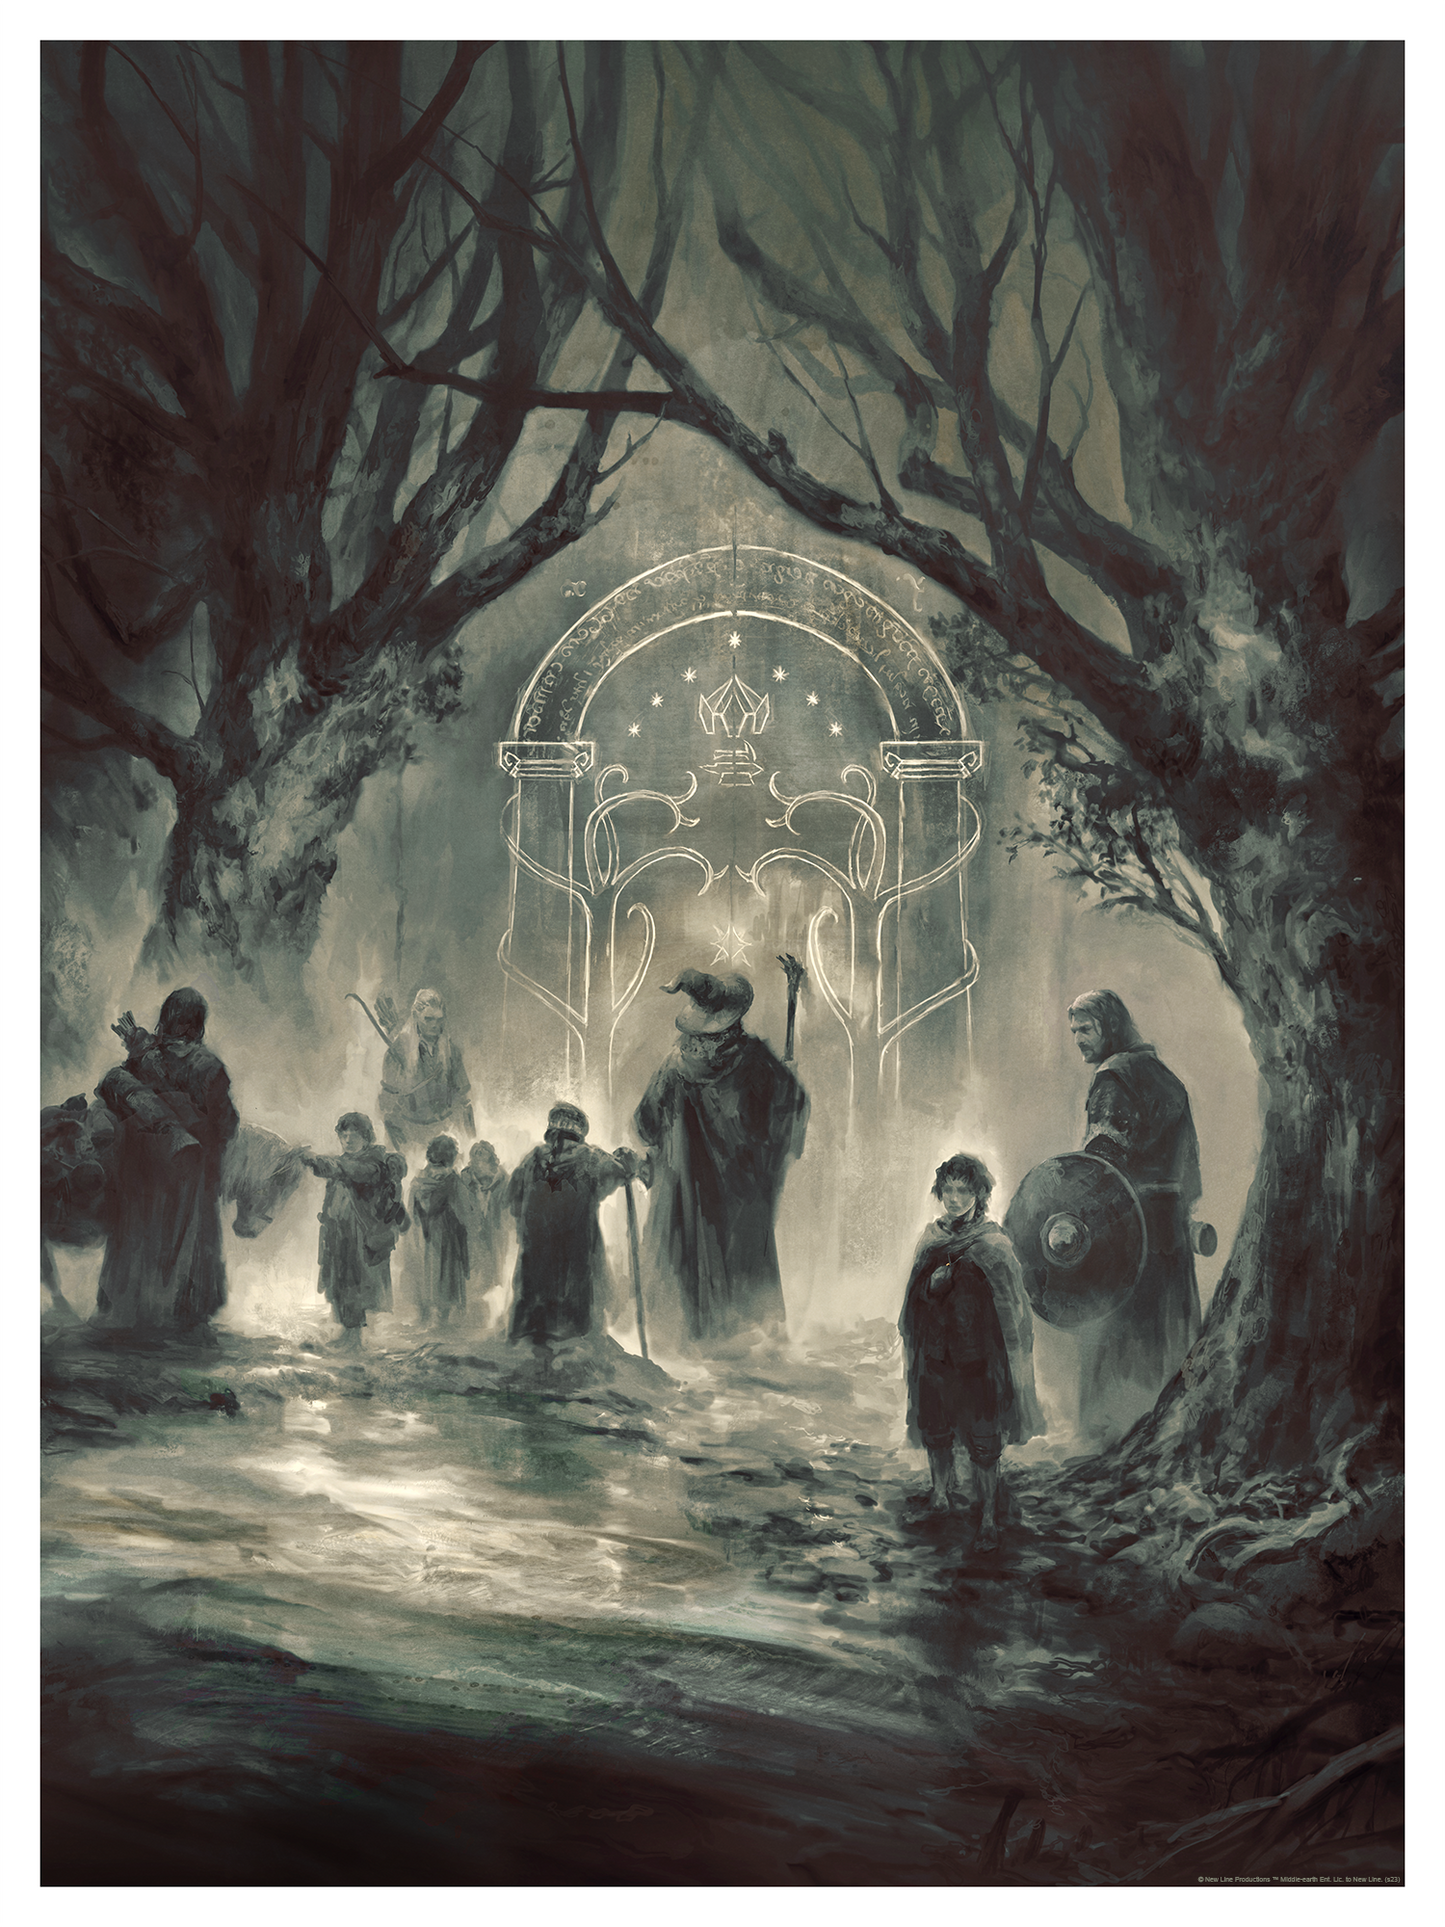 Karl Fitzgerald "The Doors of Durin"